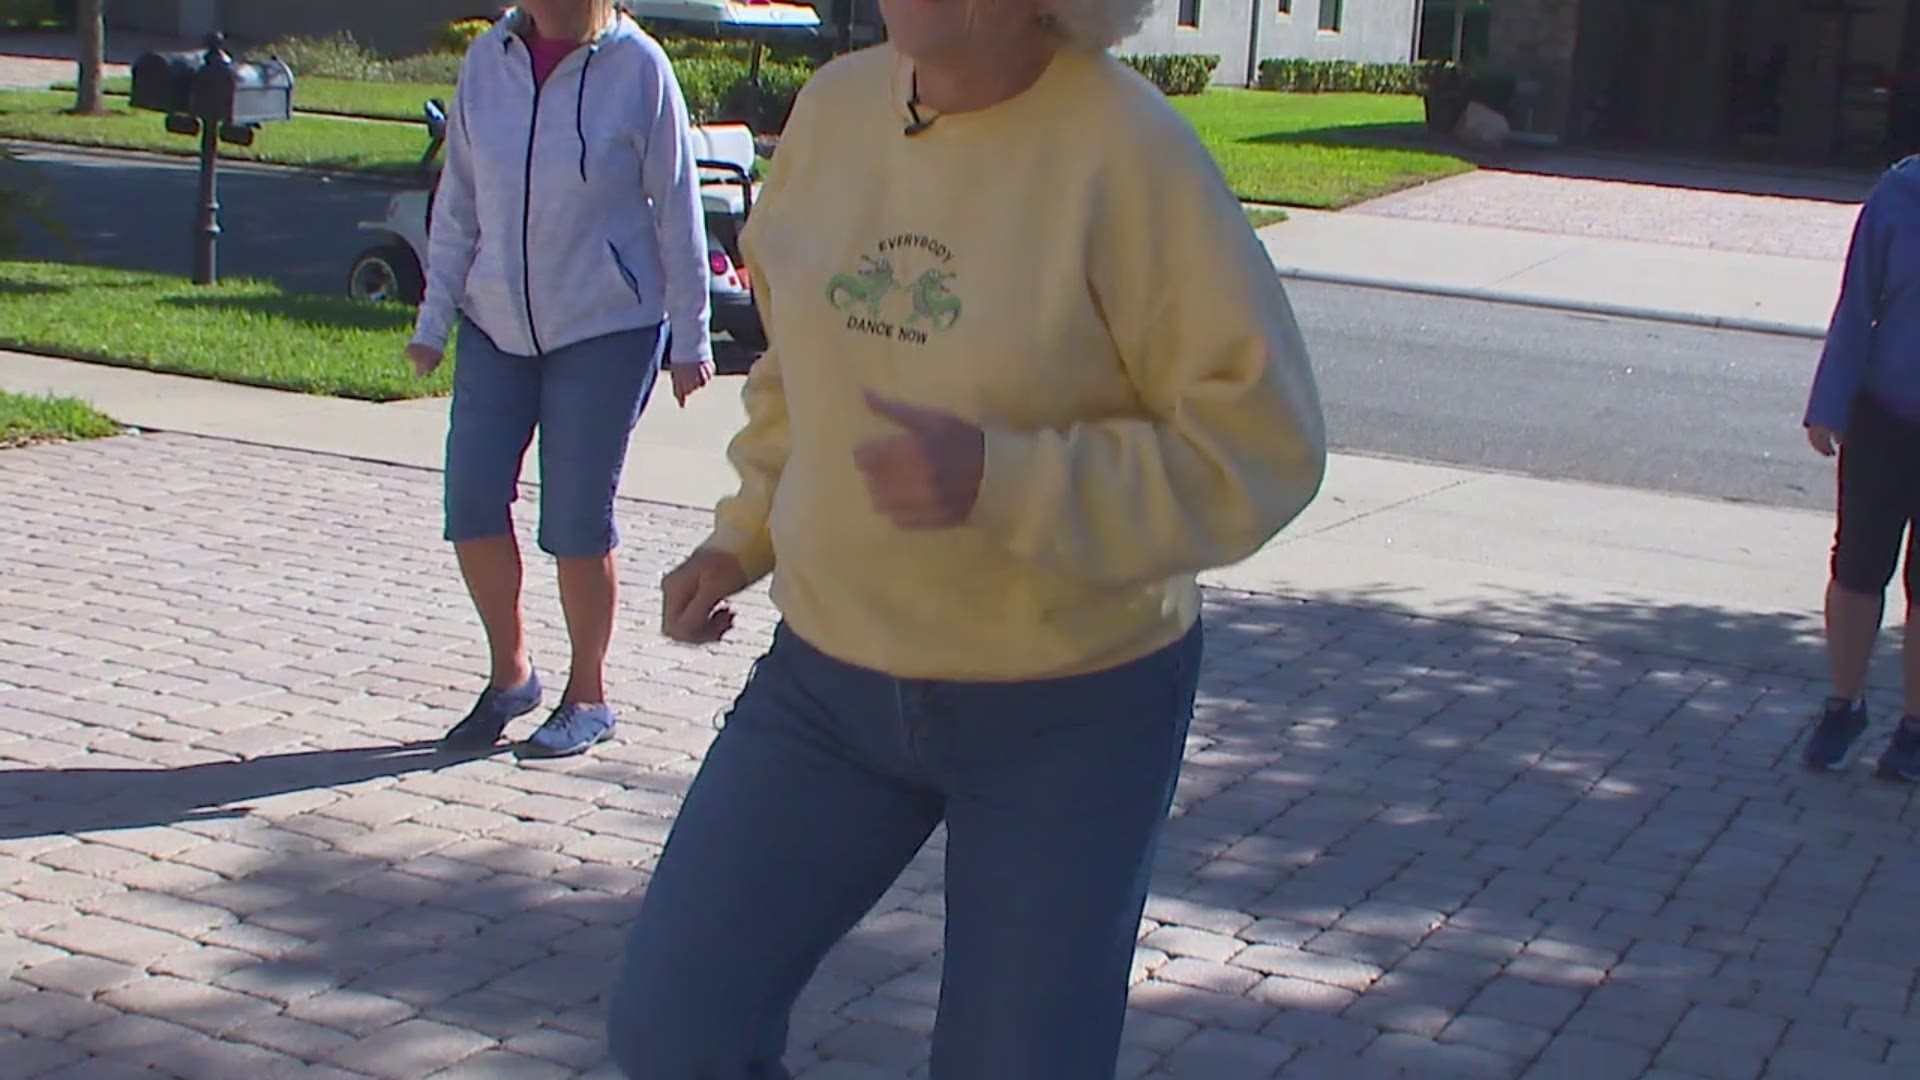 Cathy Florian taking advantage of the sunny mornings and fresh air by starting out every morning by dancing outside in her driveway and inviting neighbors to join.